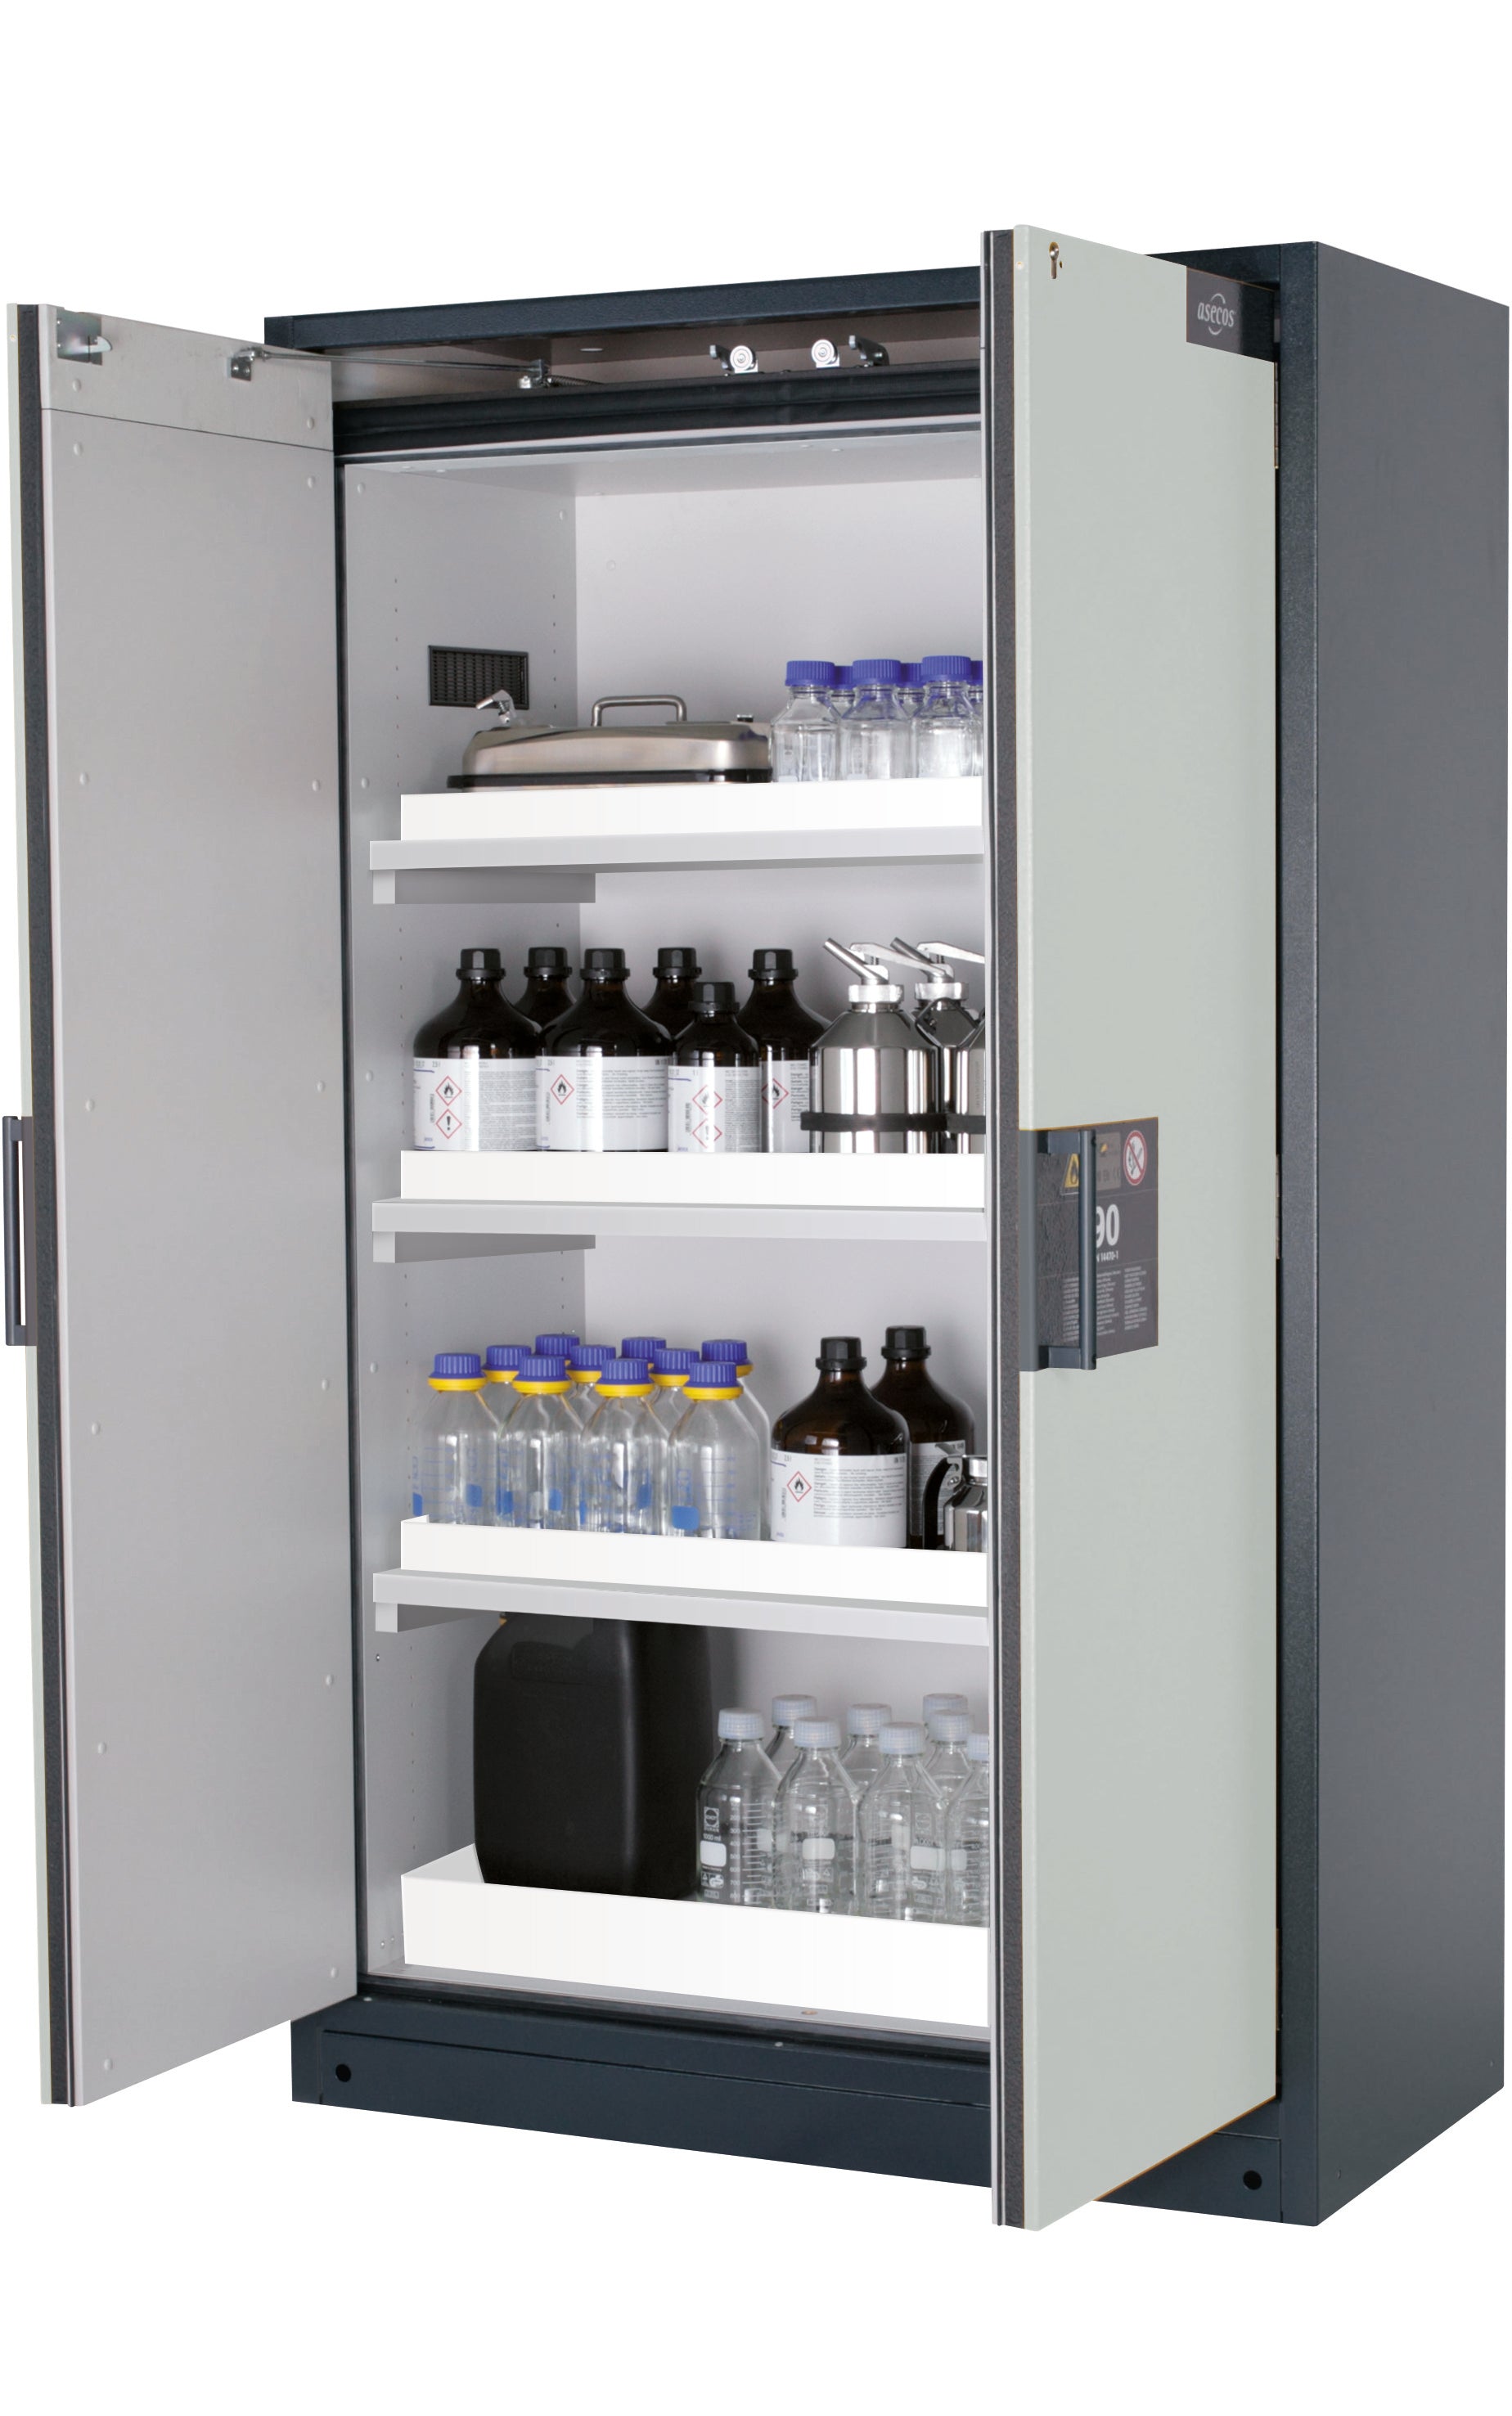 Type 90 safety storage cabinet Q-CLASSIC-90 model Q90.195.120 in light grey RAL 7035 with 3x tray shelf (standard) (polypropylene),